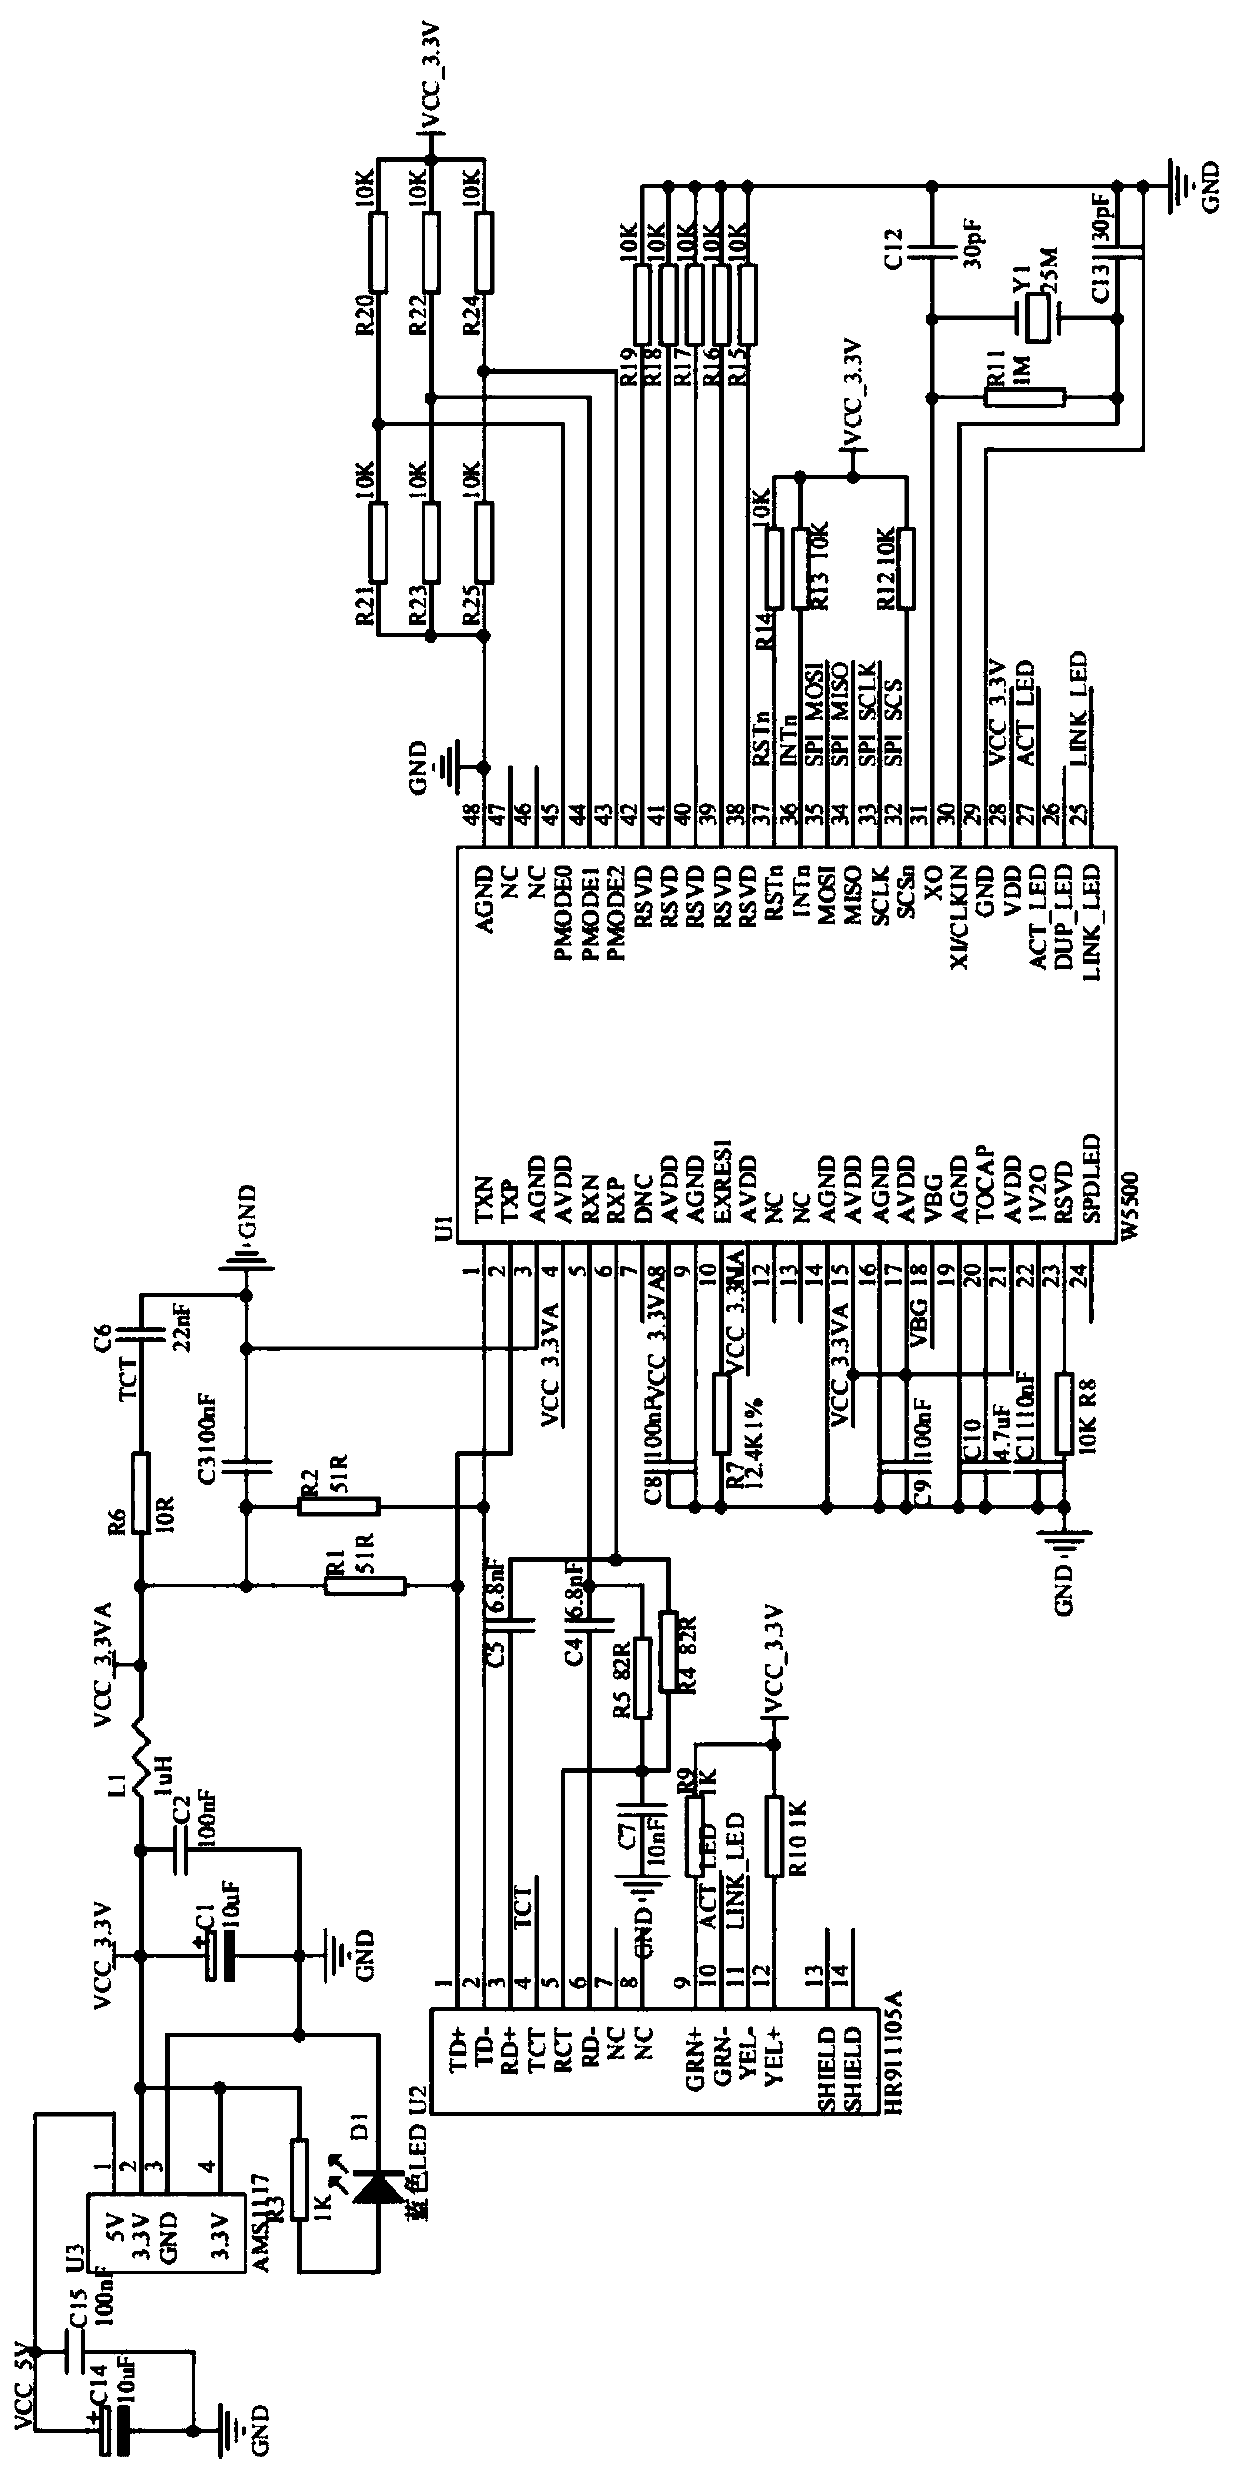 Remote power supply start-stop system and method